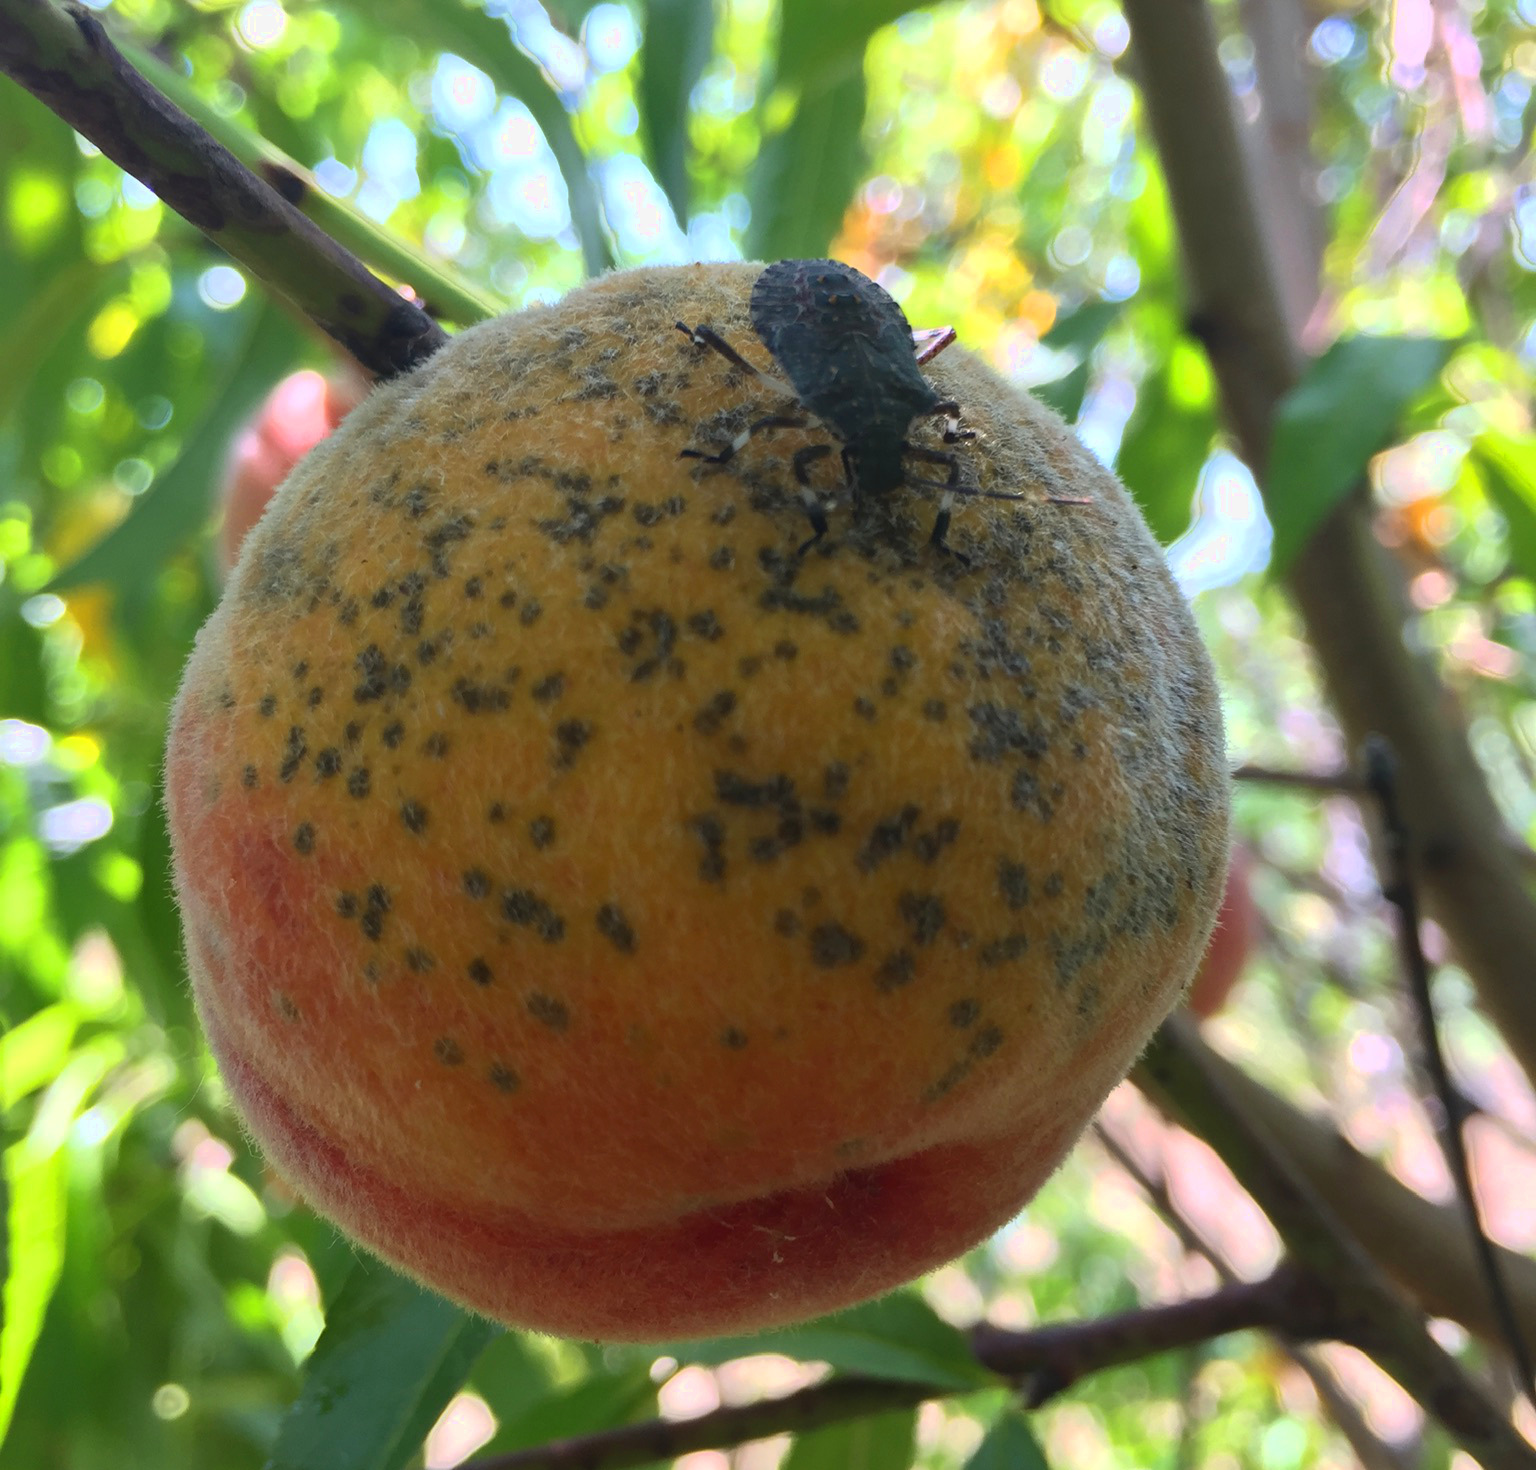 Peach with scab